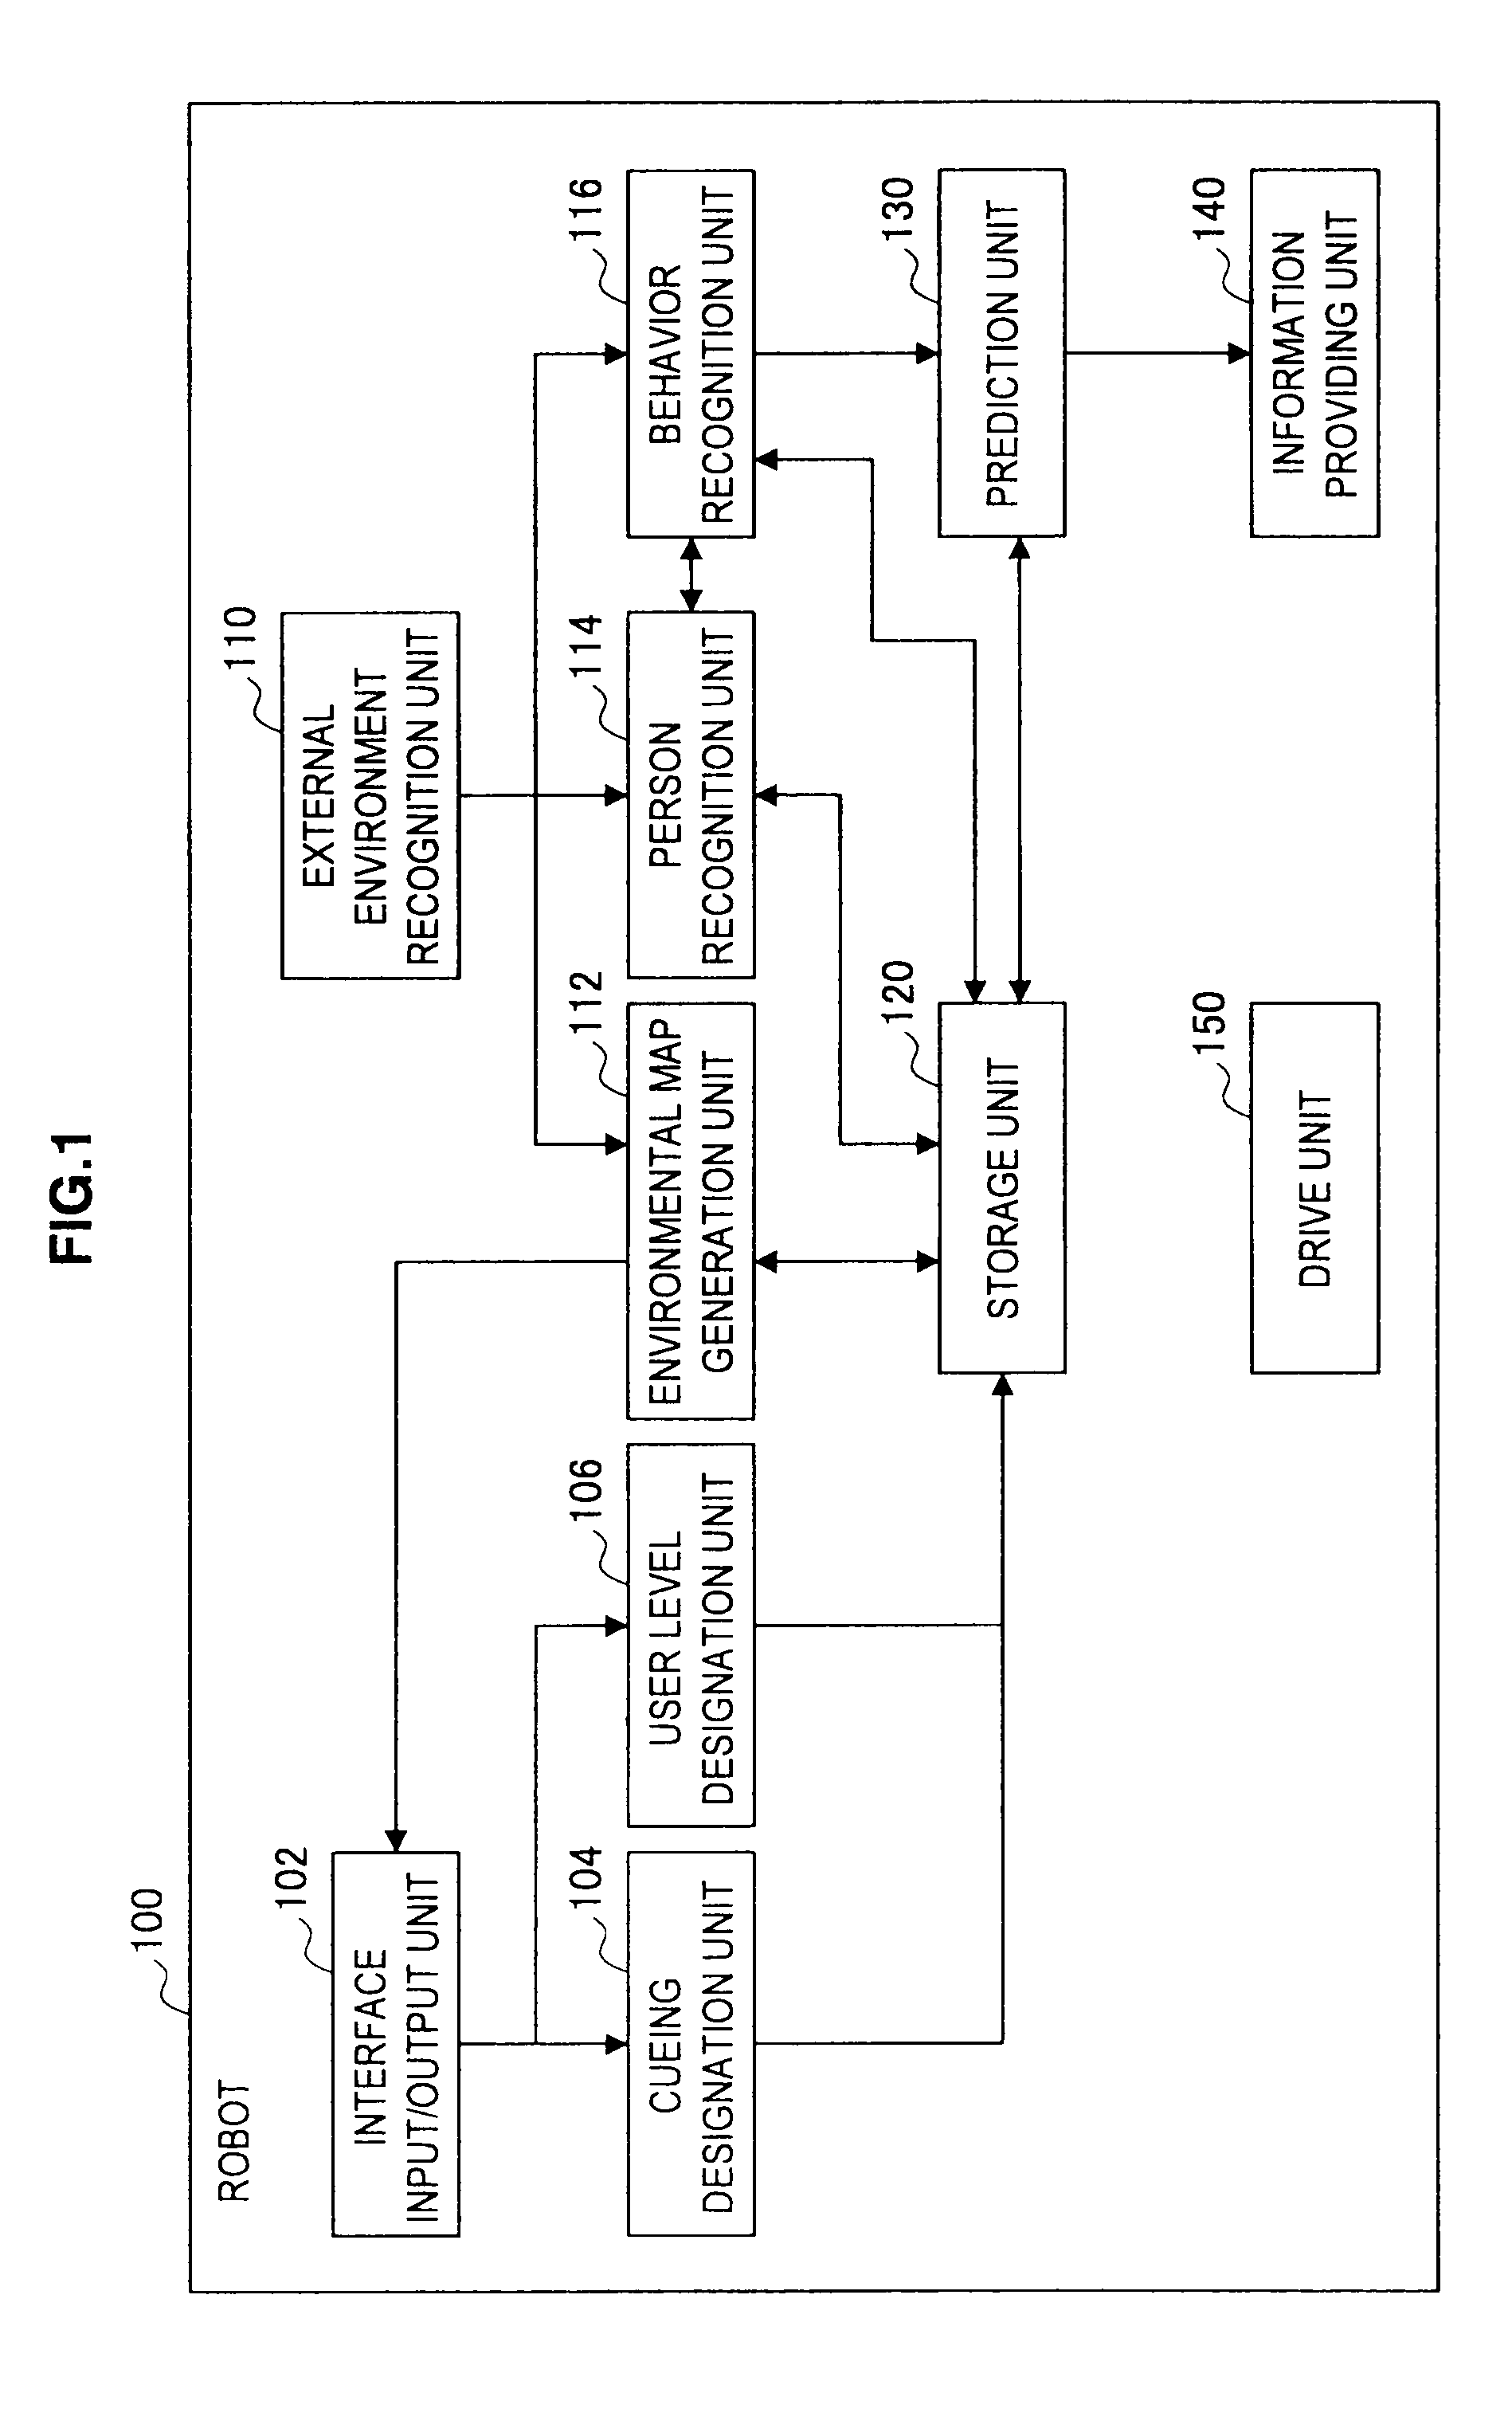 Robot apparatus, information providing method carried out by the robot apparatus and computer storage media